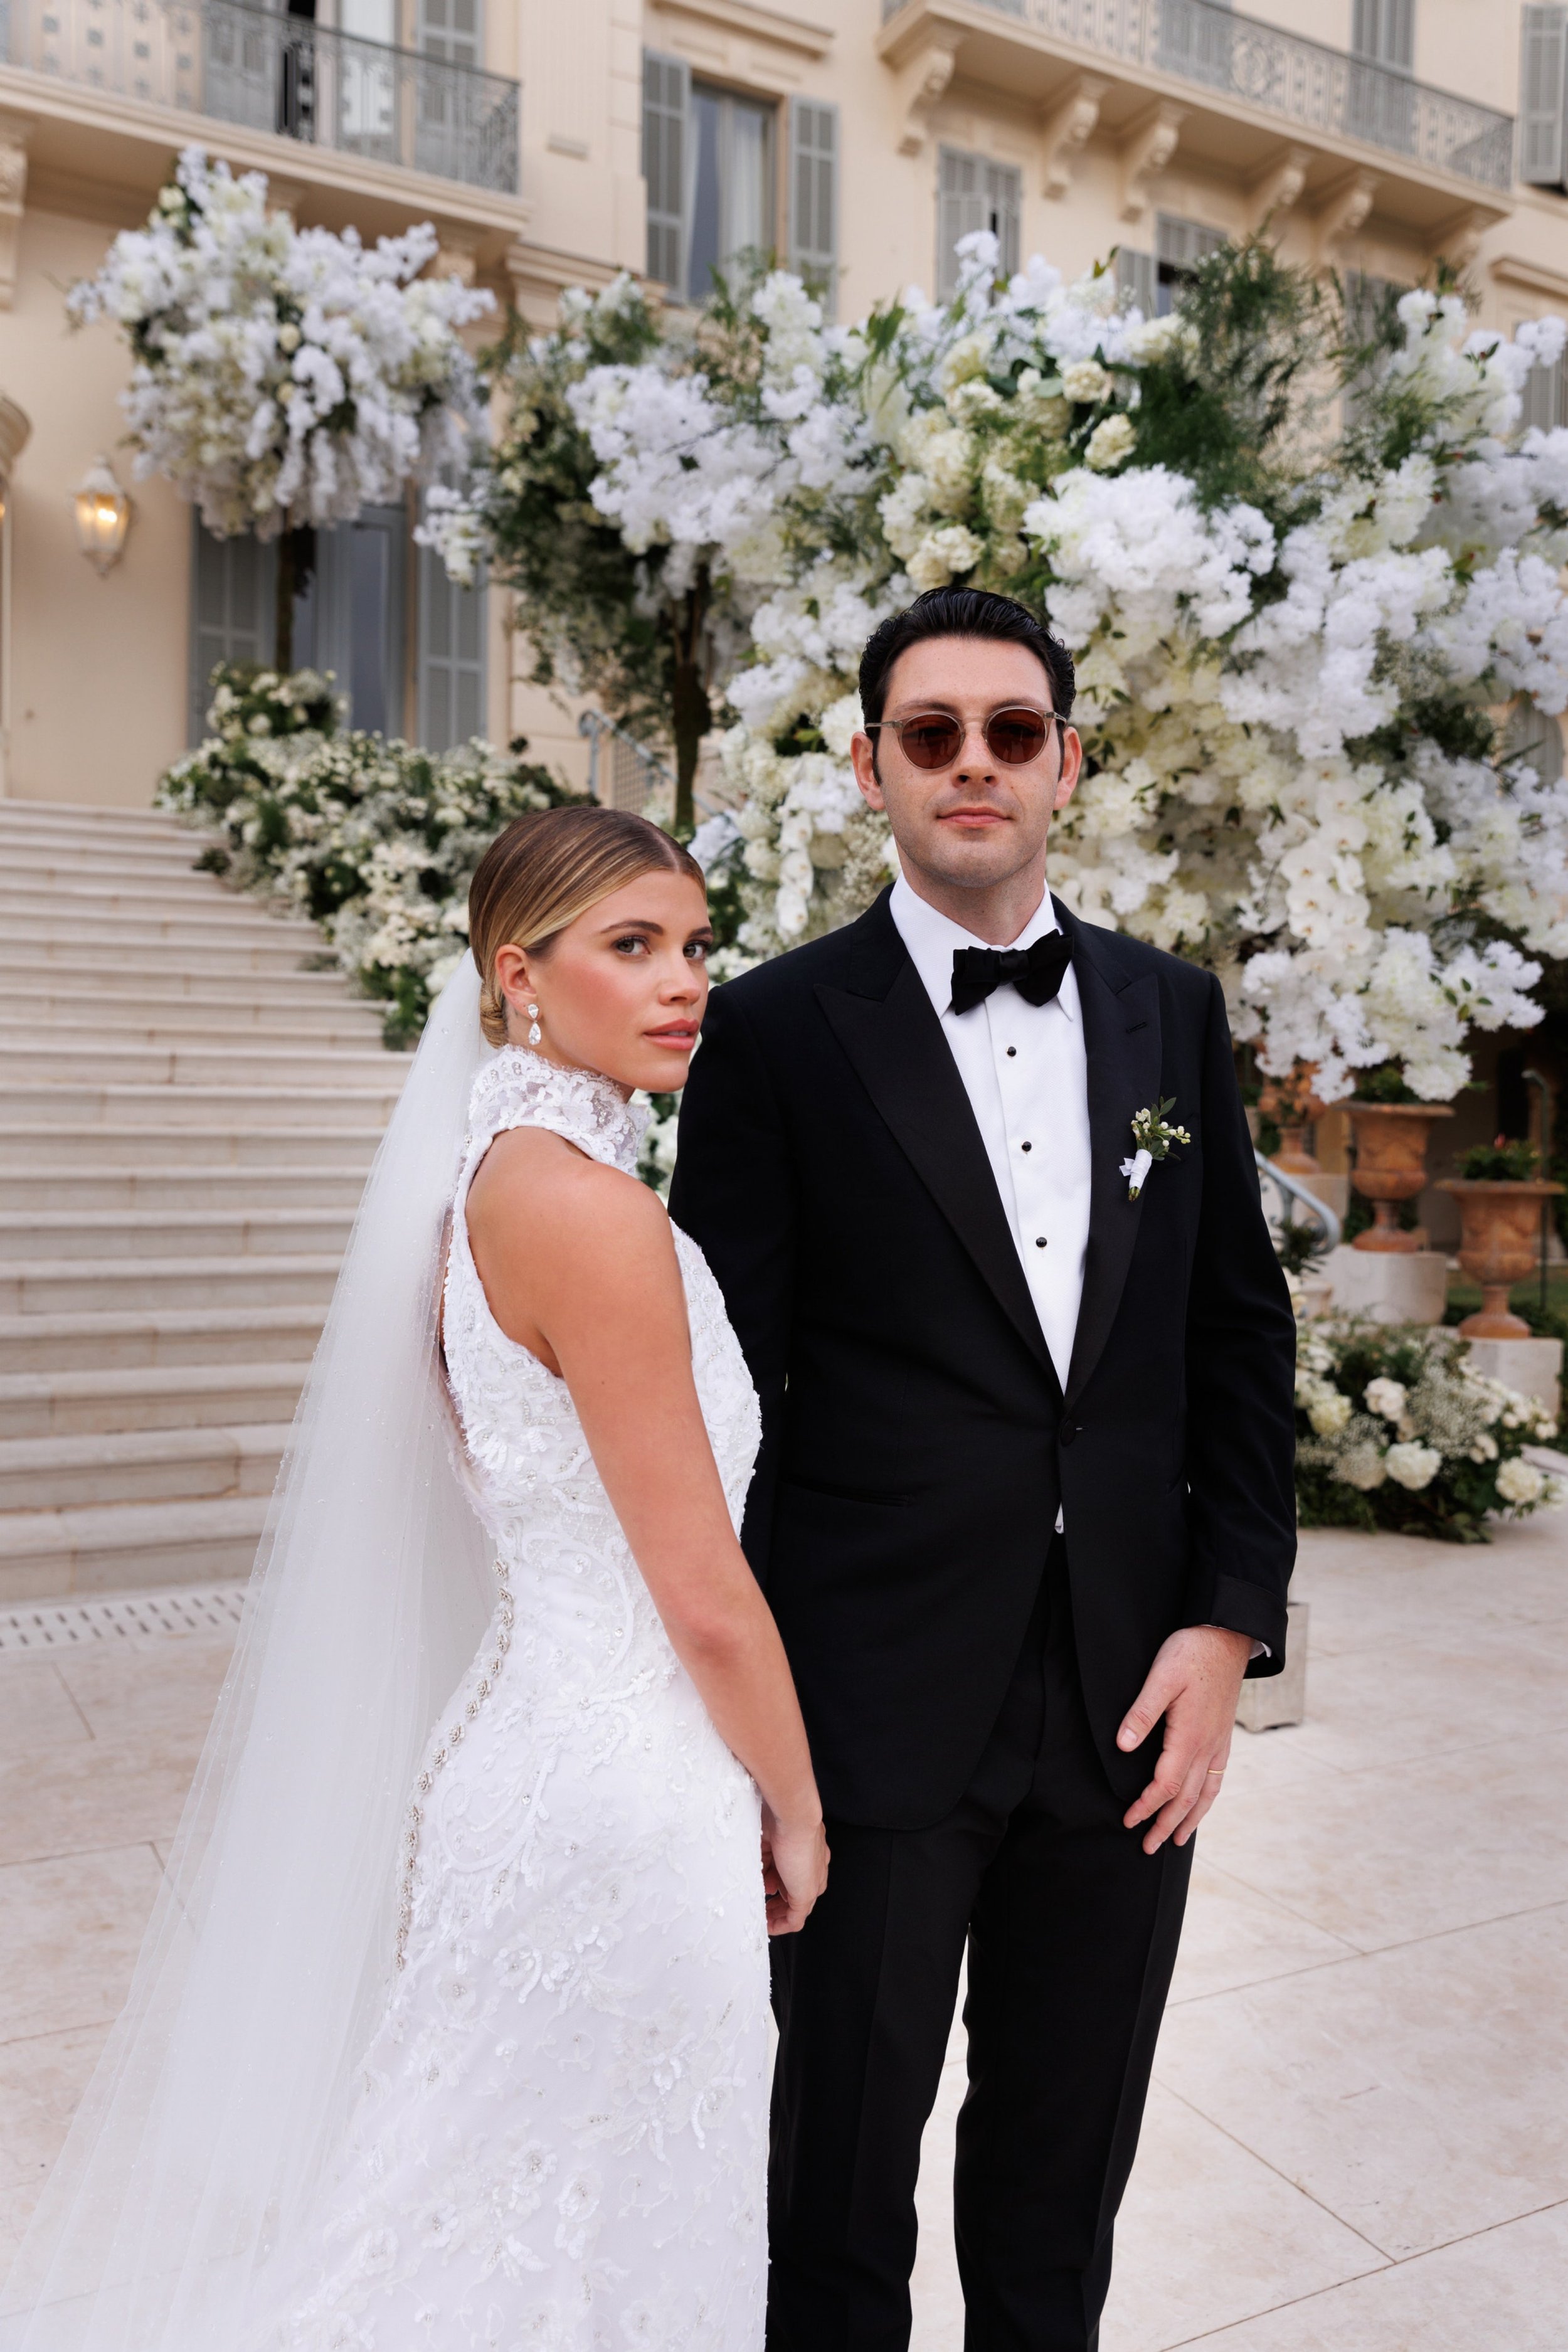 Anya Taylor-Joy and Malcolm McRae ties the knot in dreamy Italy